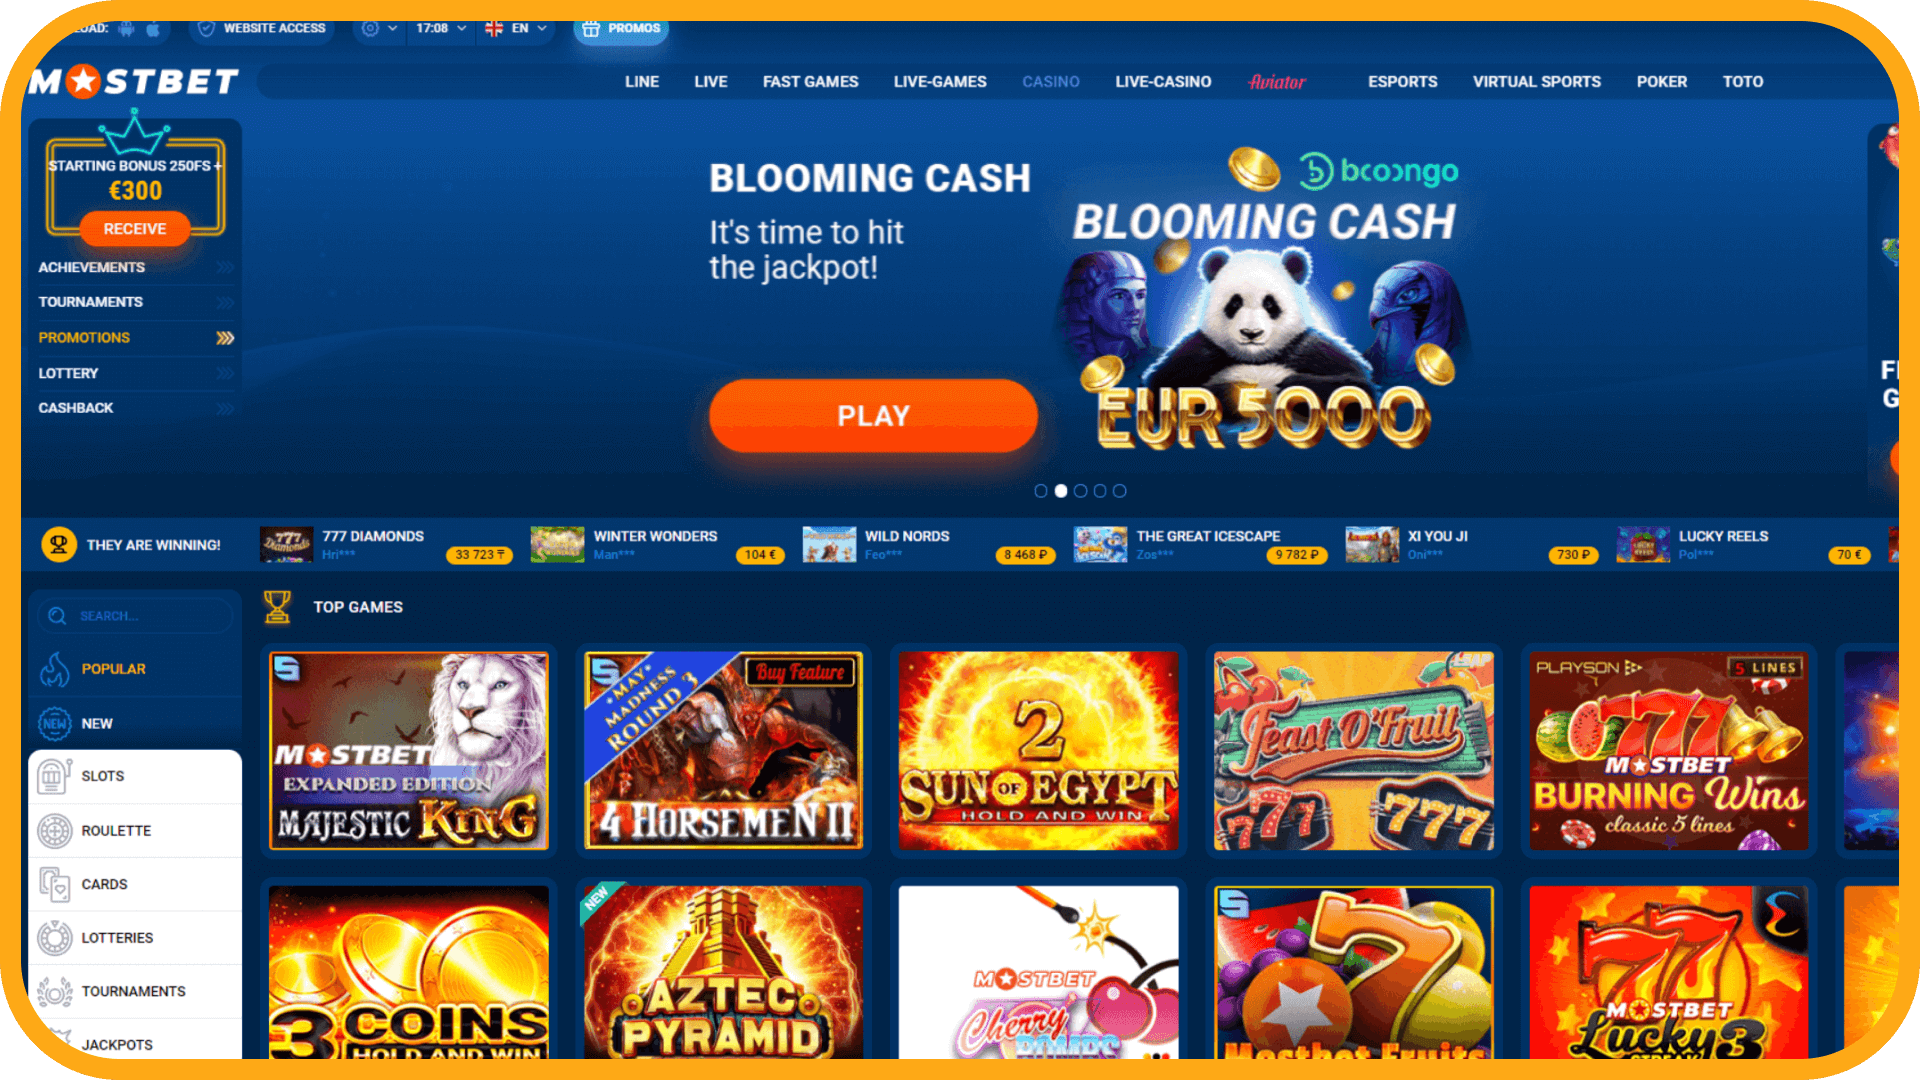 What Make Mostbet Betting Company and Online Casino in Turkey Don't Want You To Know